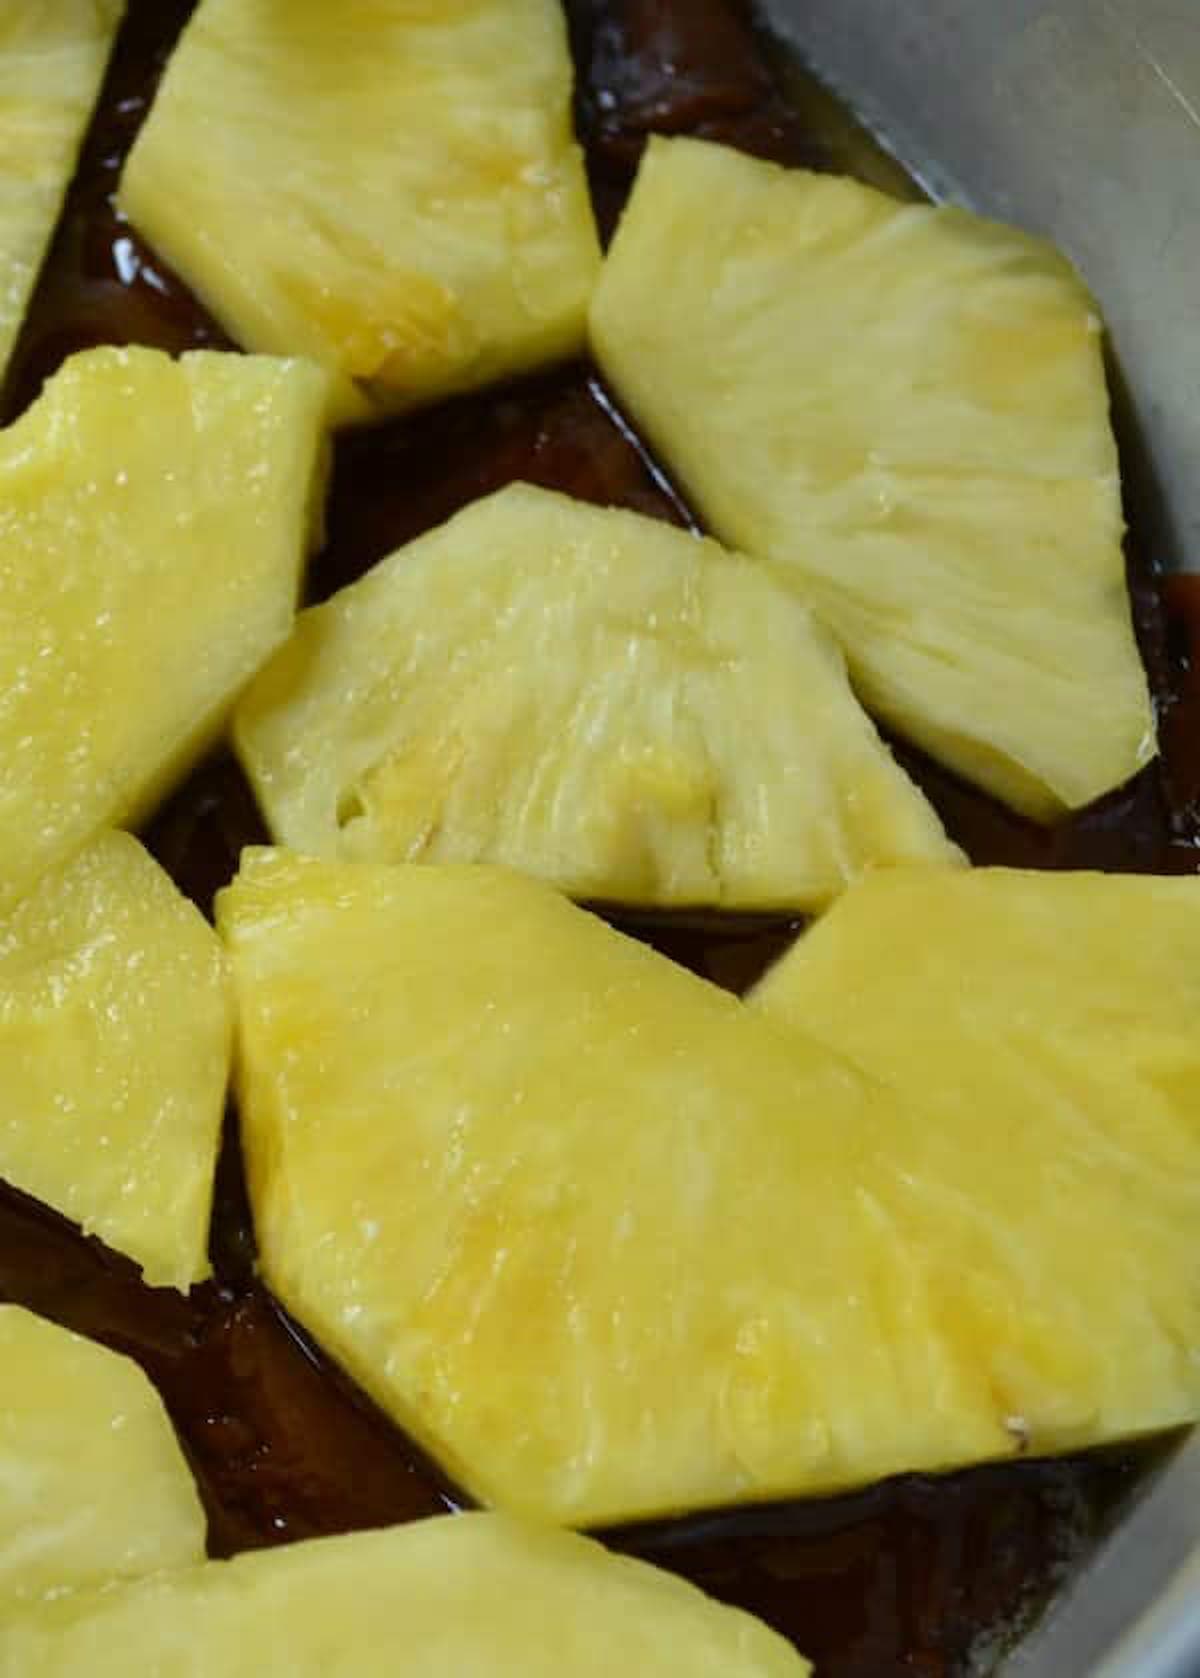 Caramelized Sugar topping placed into a cake pan and topped with fresh pineapple slices.